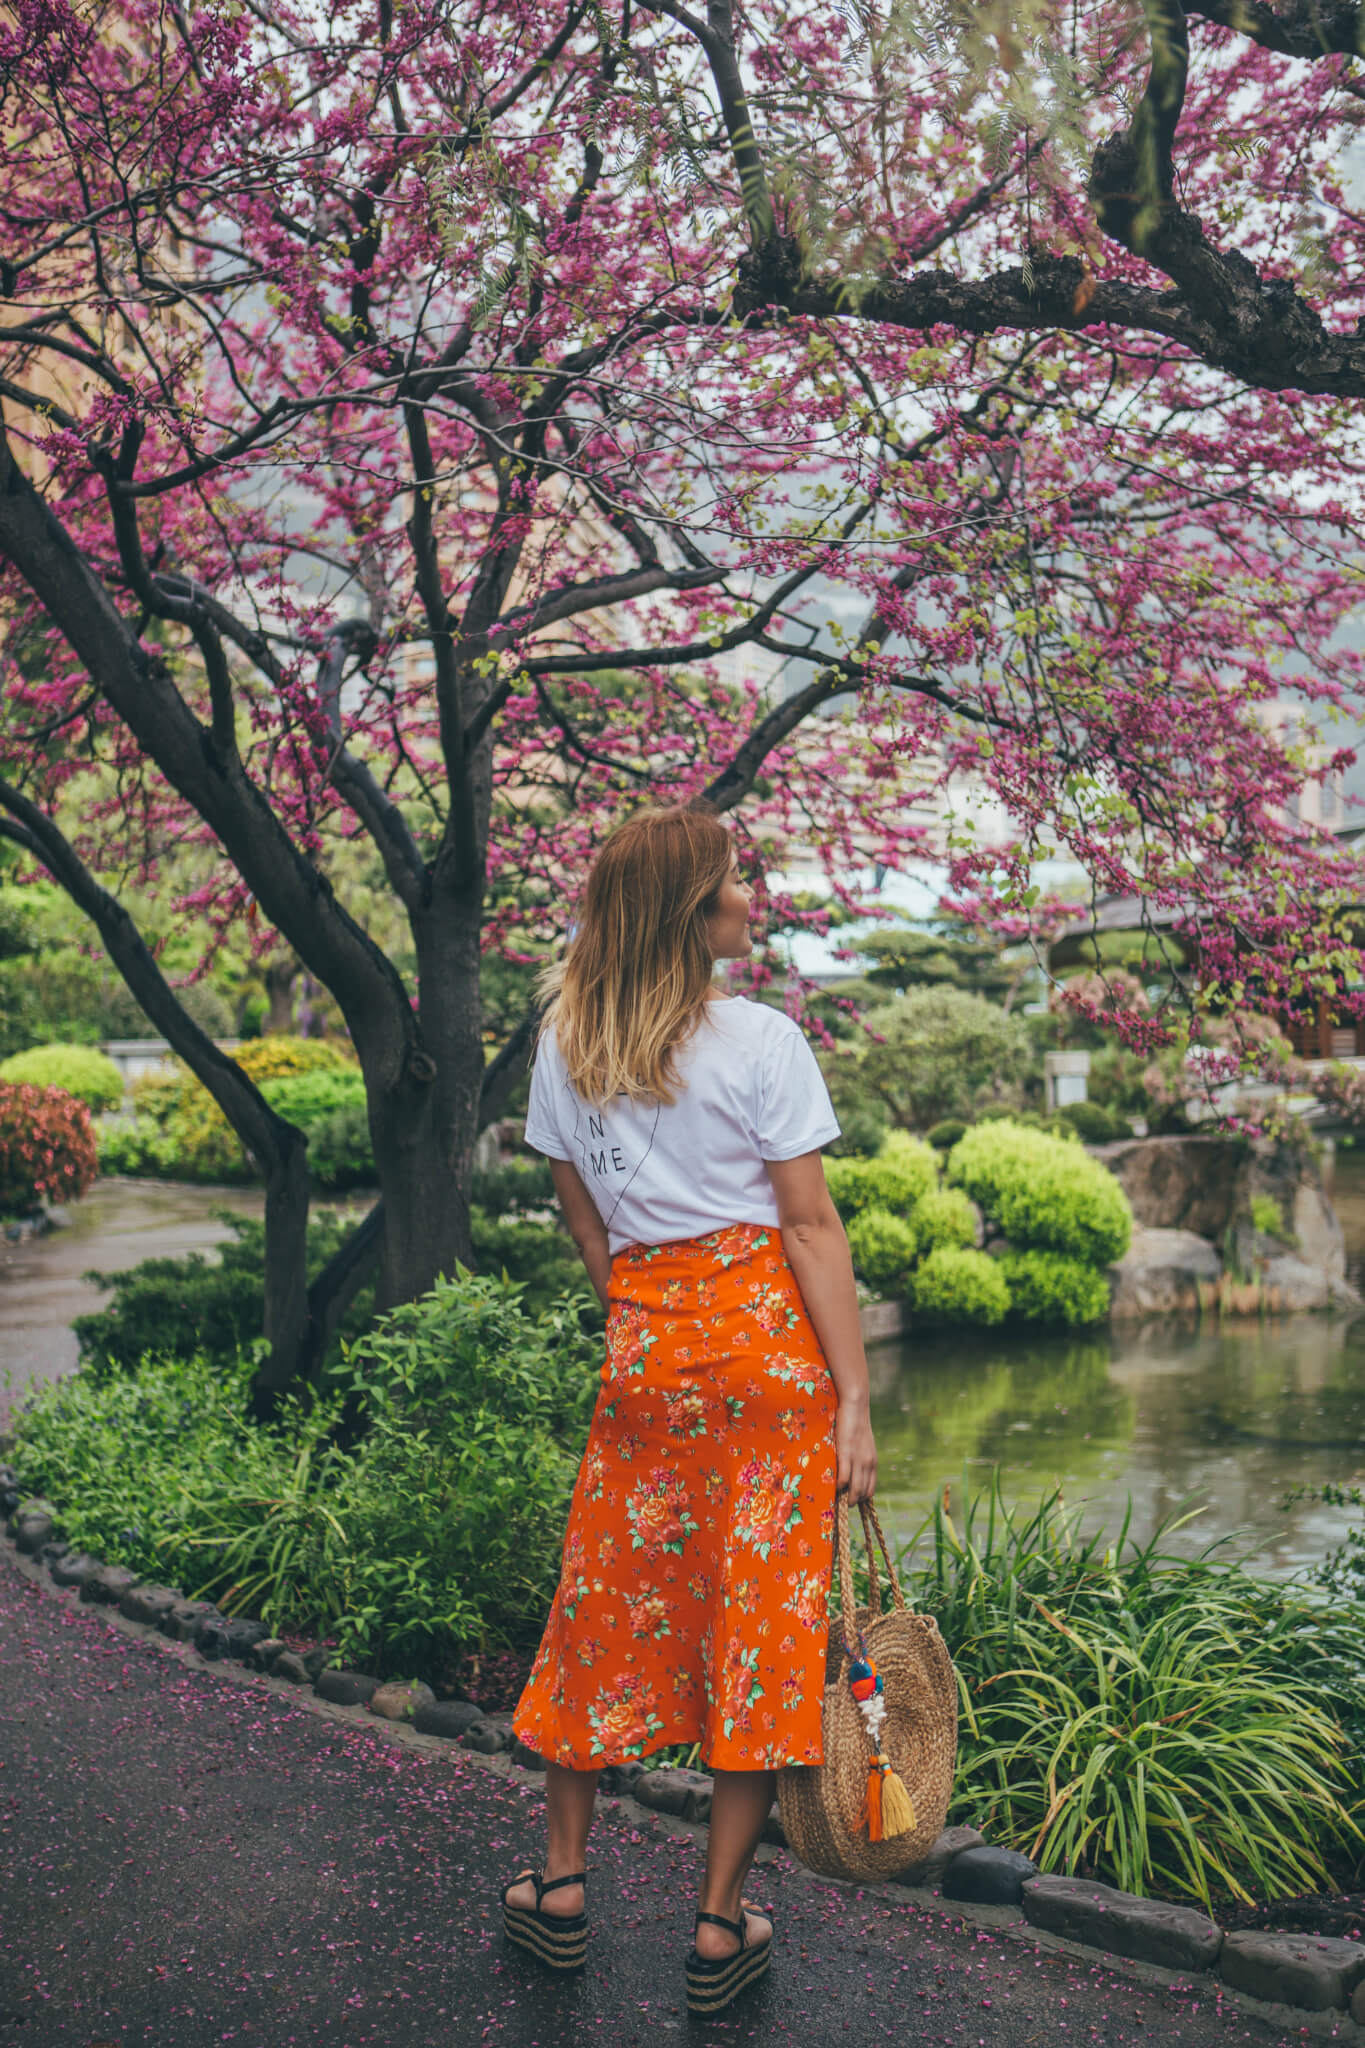 And-Other-Stories-Japanese-Garden-5-of-12-1 Japanese Garden Monaco - What I Wore